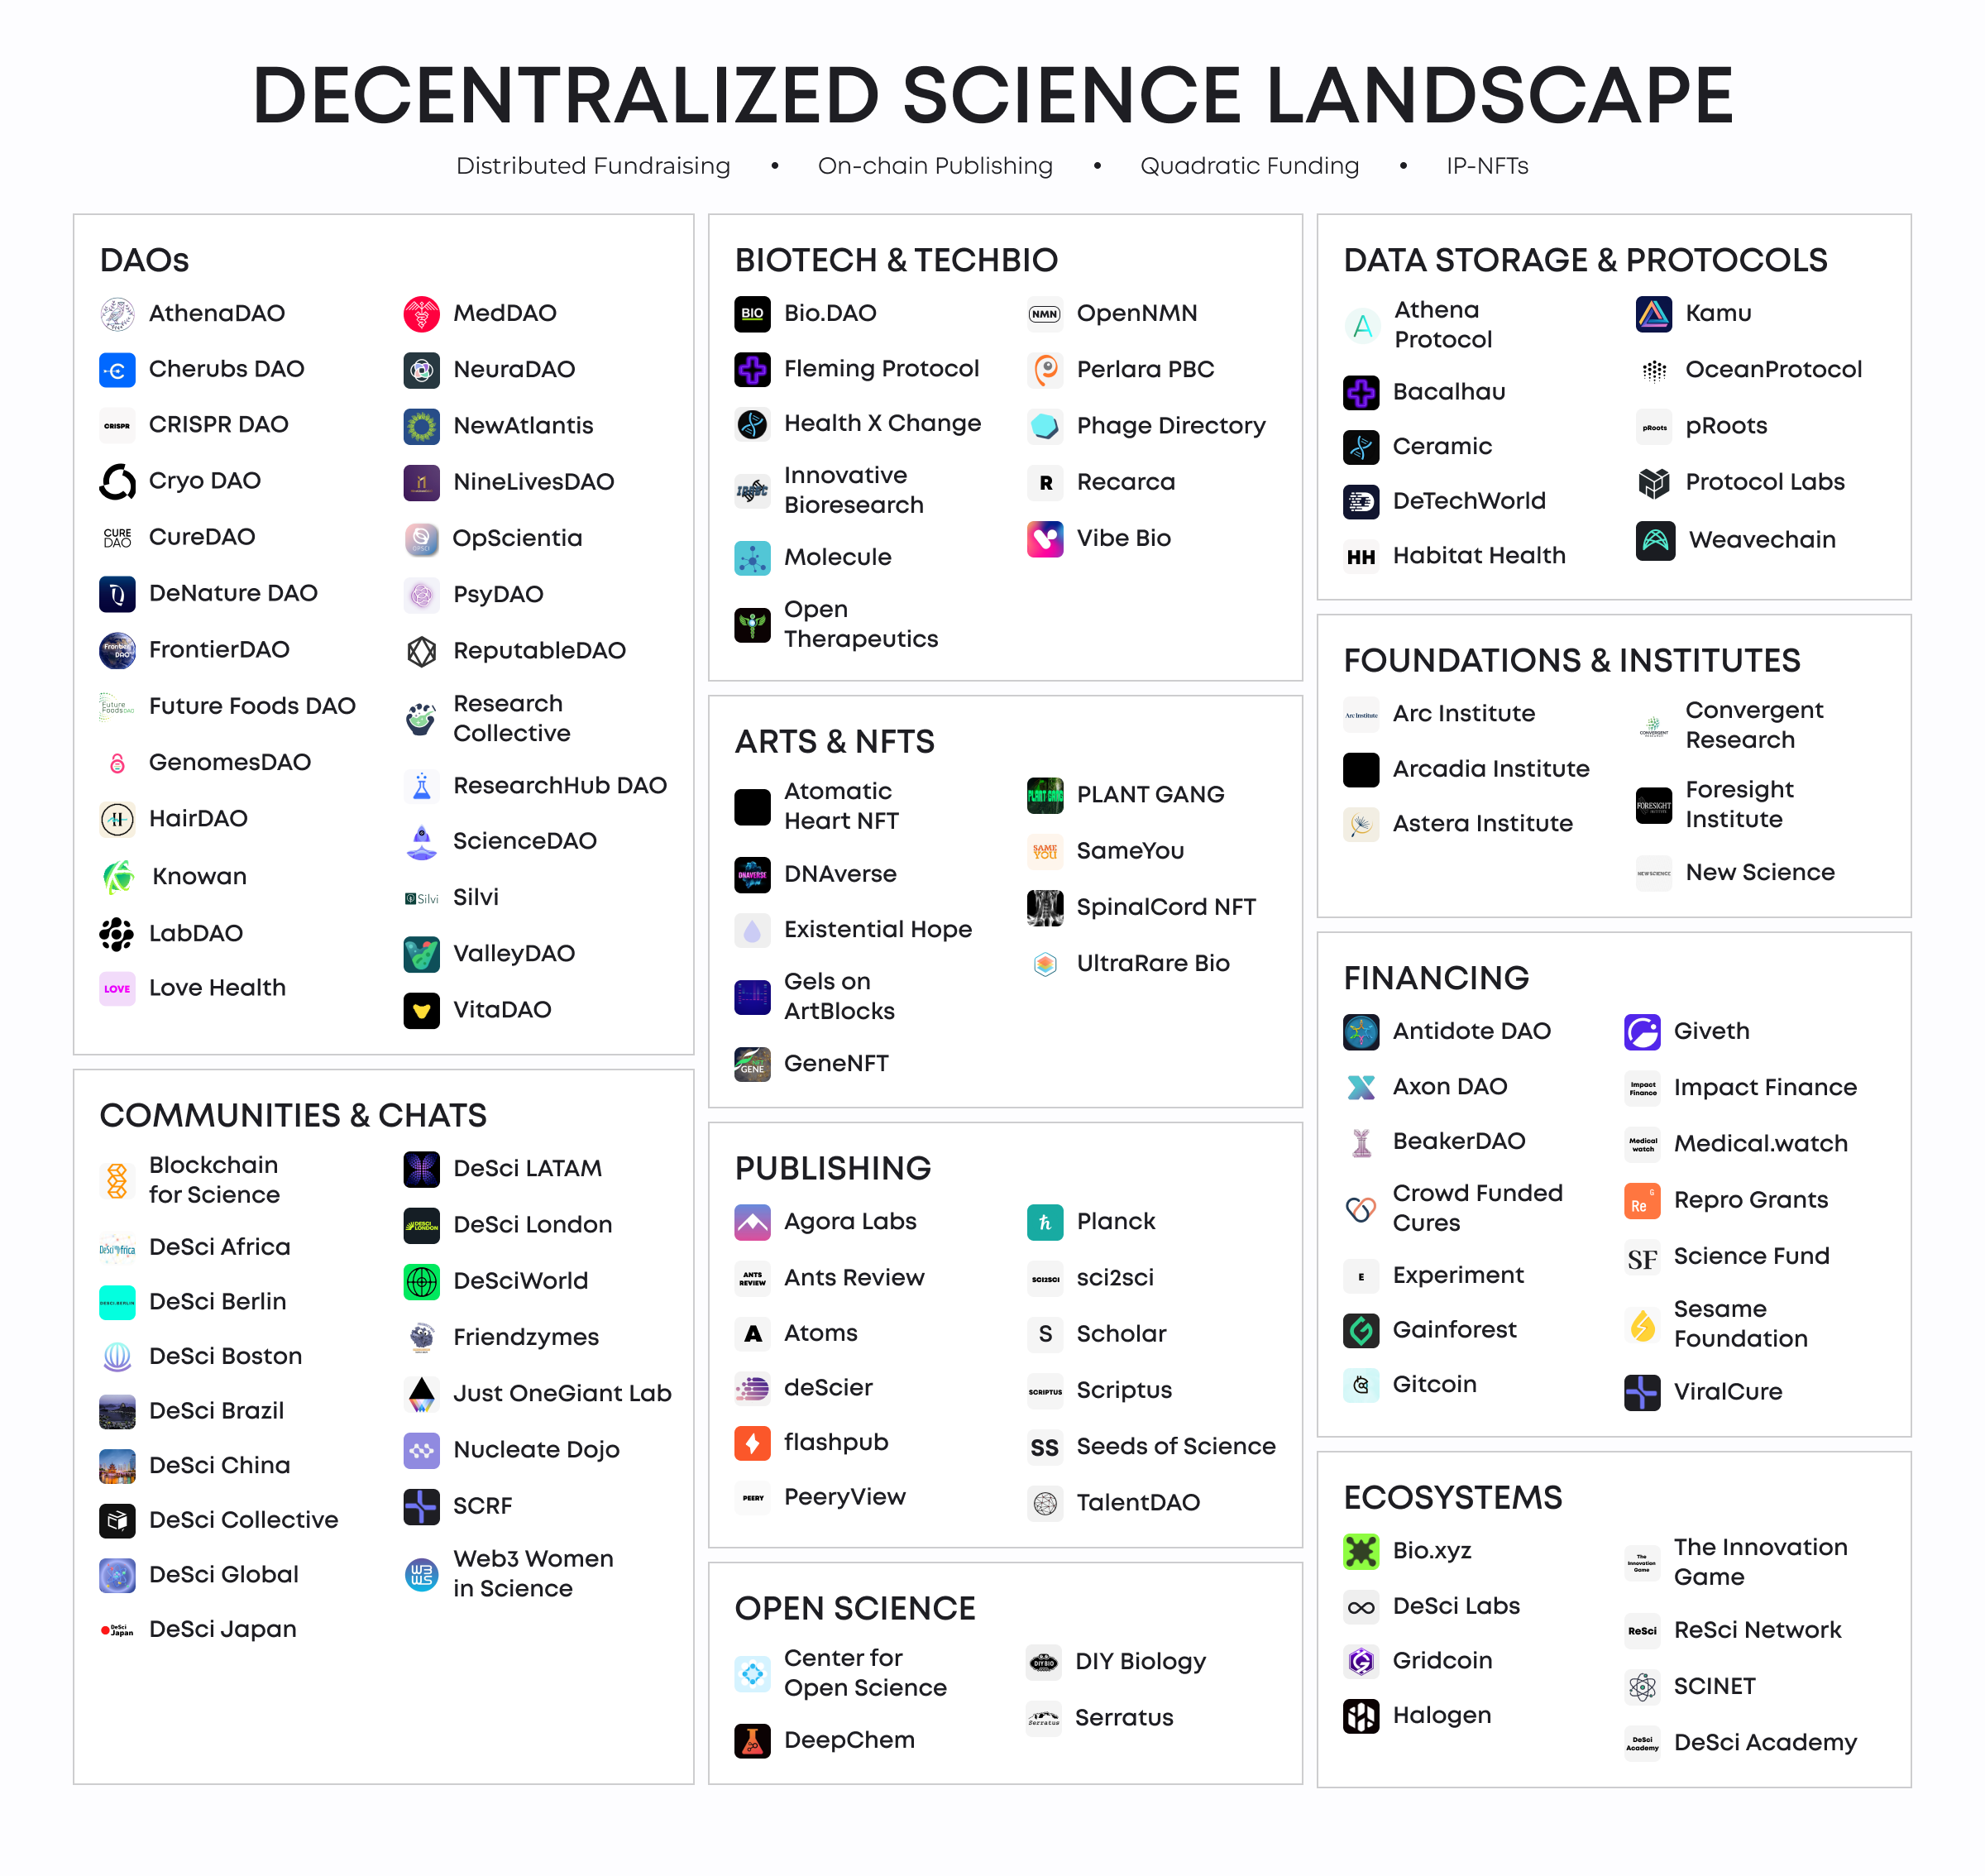 Decentralized Science concept's potential is highlighted by the leaders of the industries.